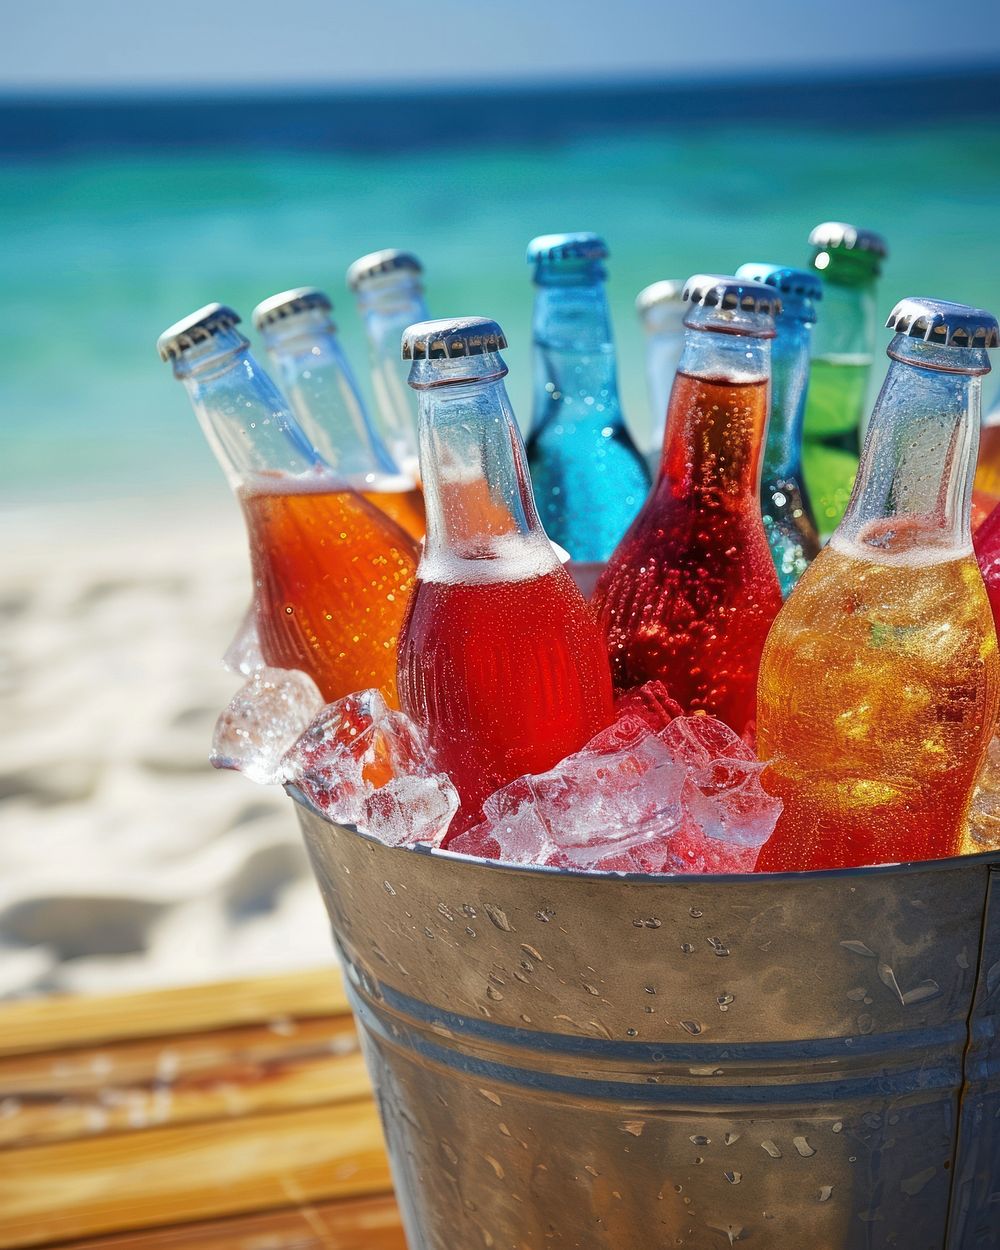 Assorted soda bottles in a metal bucket full of ice put on wood table against beach view summer drink beer.